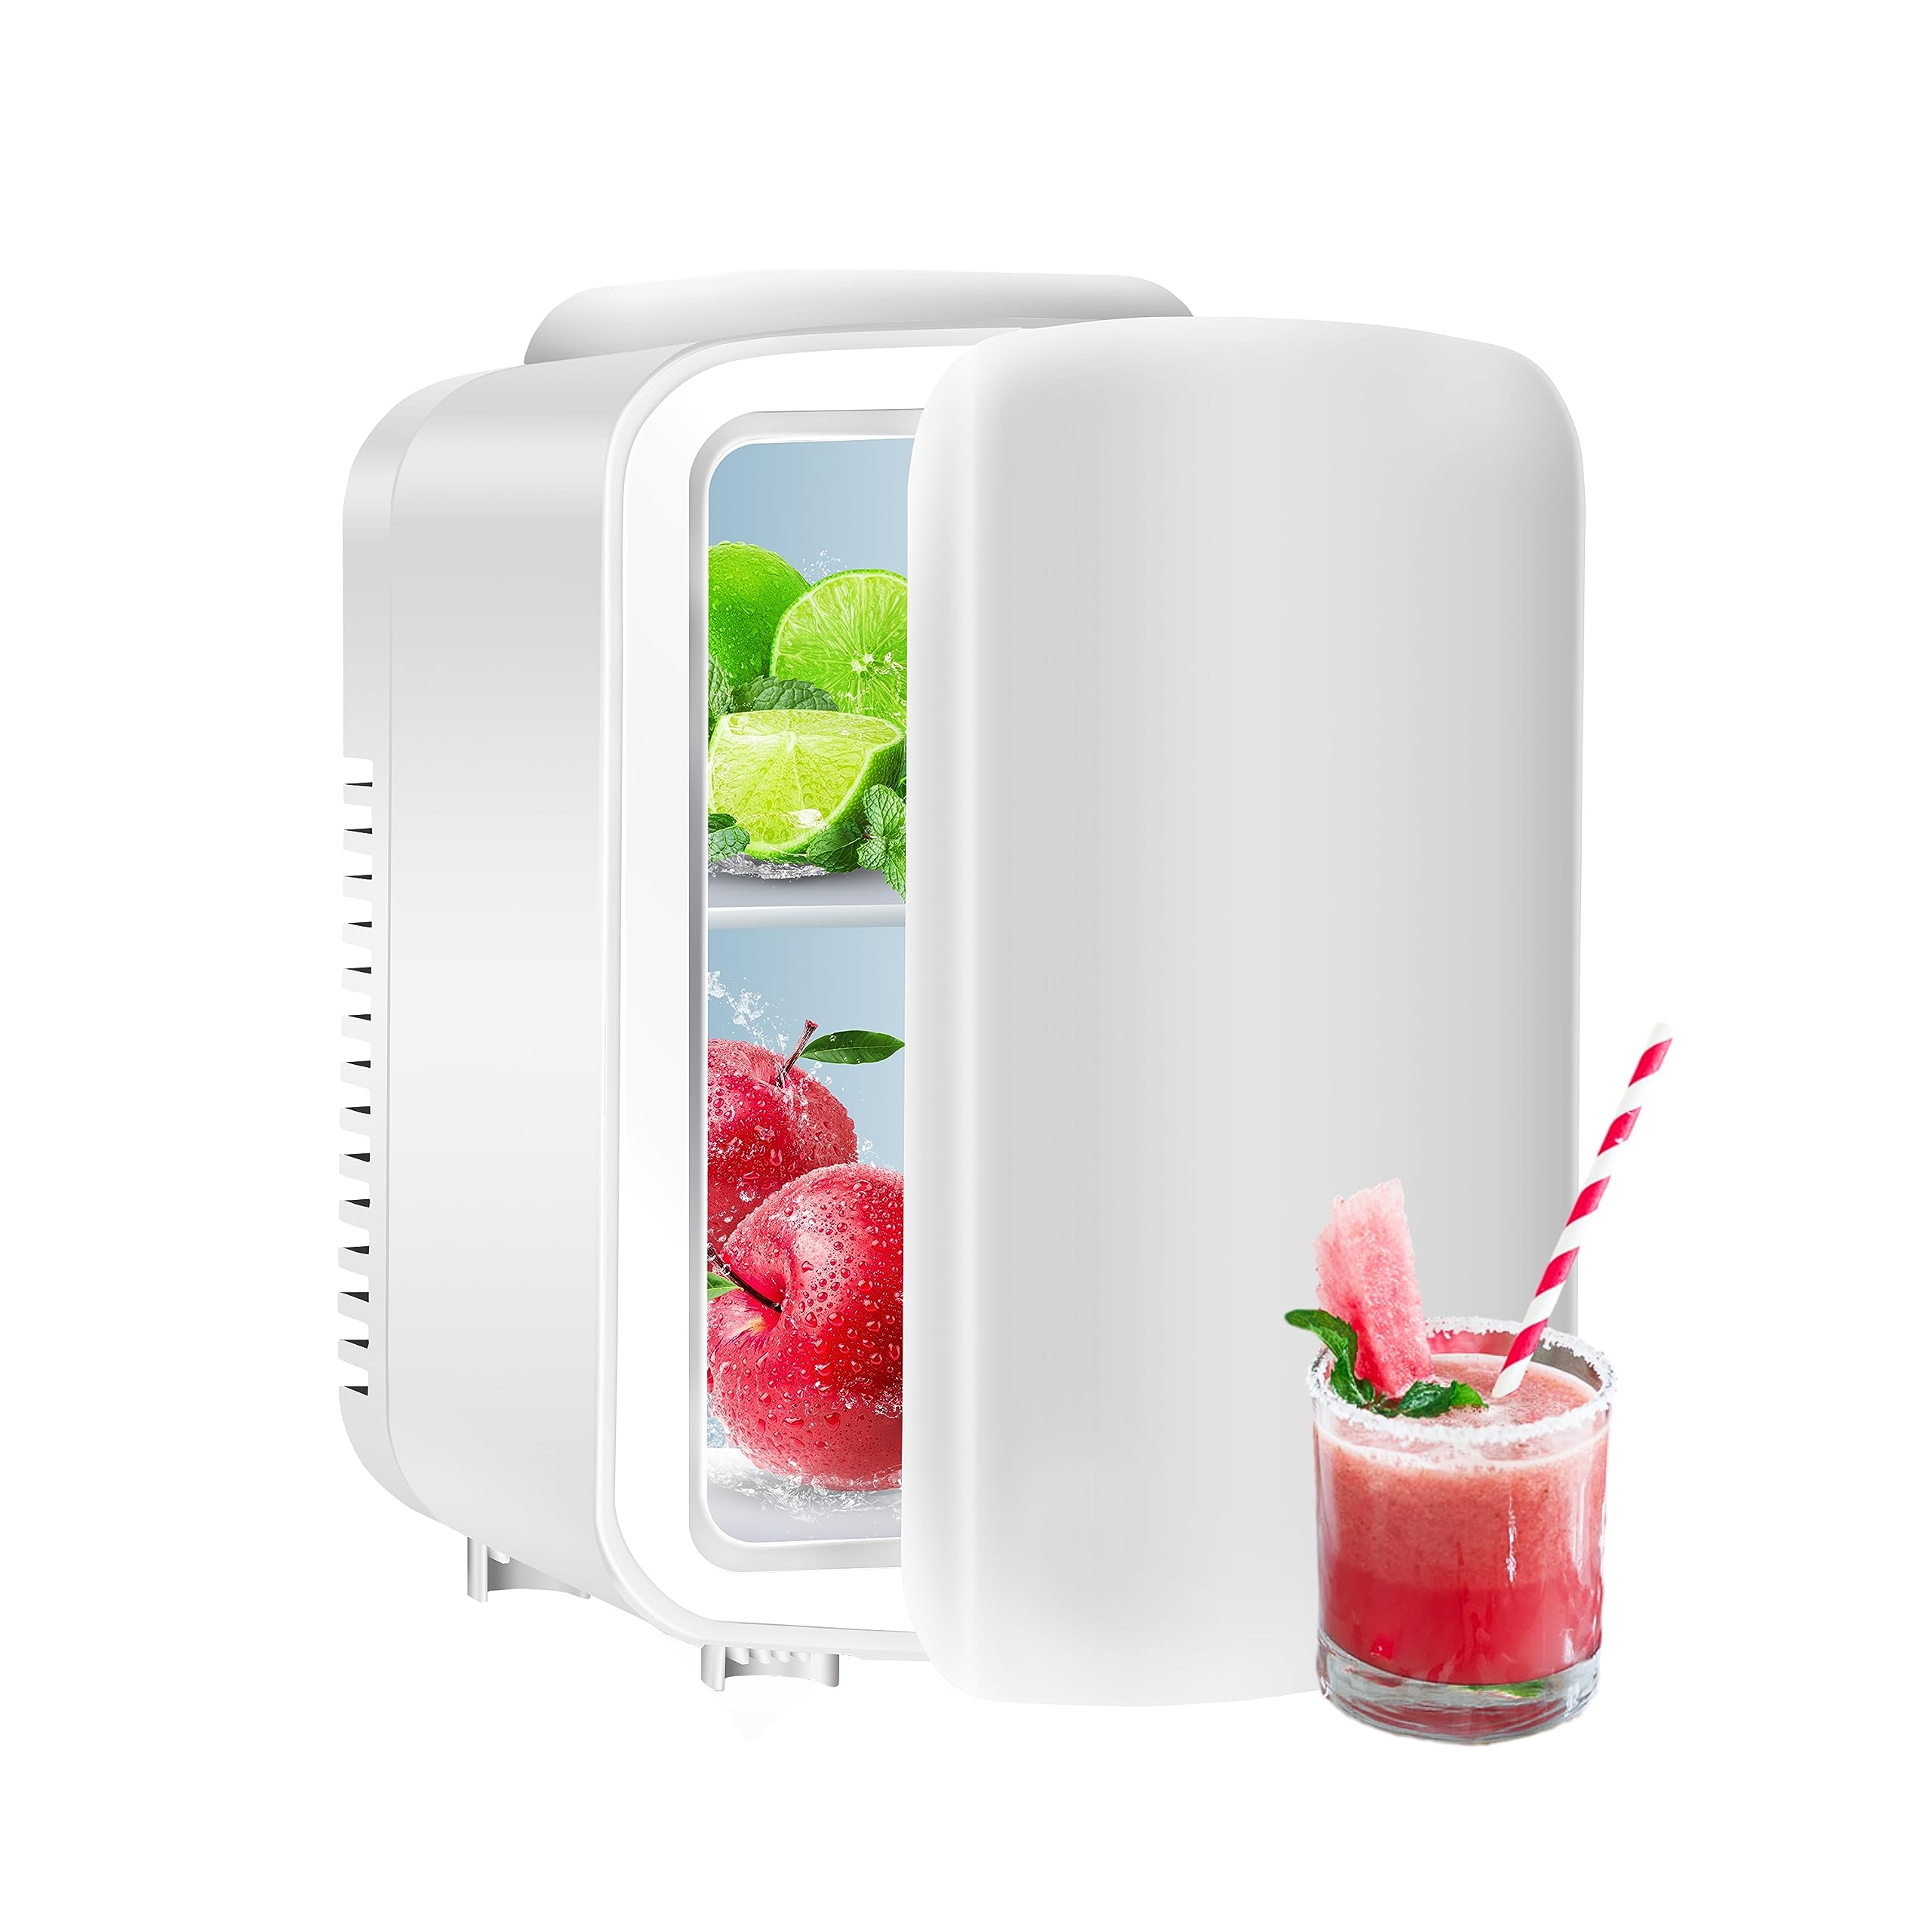 Simple Deluxe Portable Mini Fridge, 4L/6 Can Cooler and Warmer Compact Refrigerator for Skincare, Cosmetics, Beverage, Food, 110V AC/12V DC, for Bedroom, White